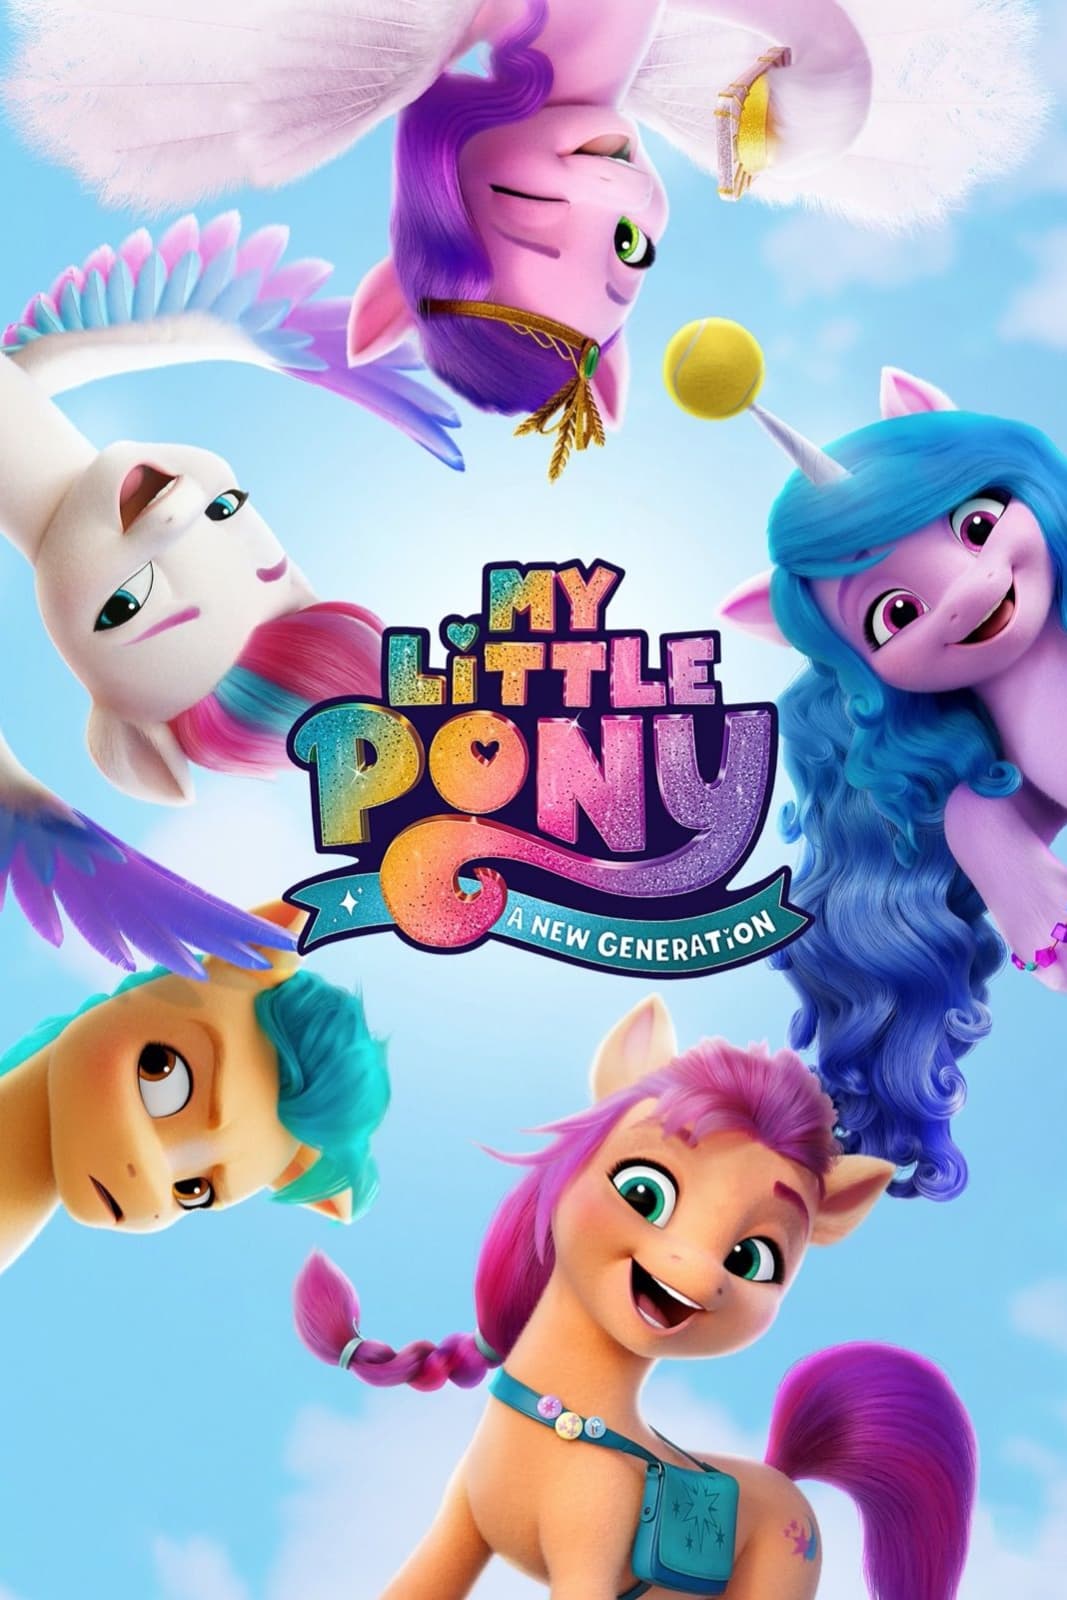 Poster for the movie "My Little Pony: A New Generation"